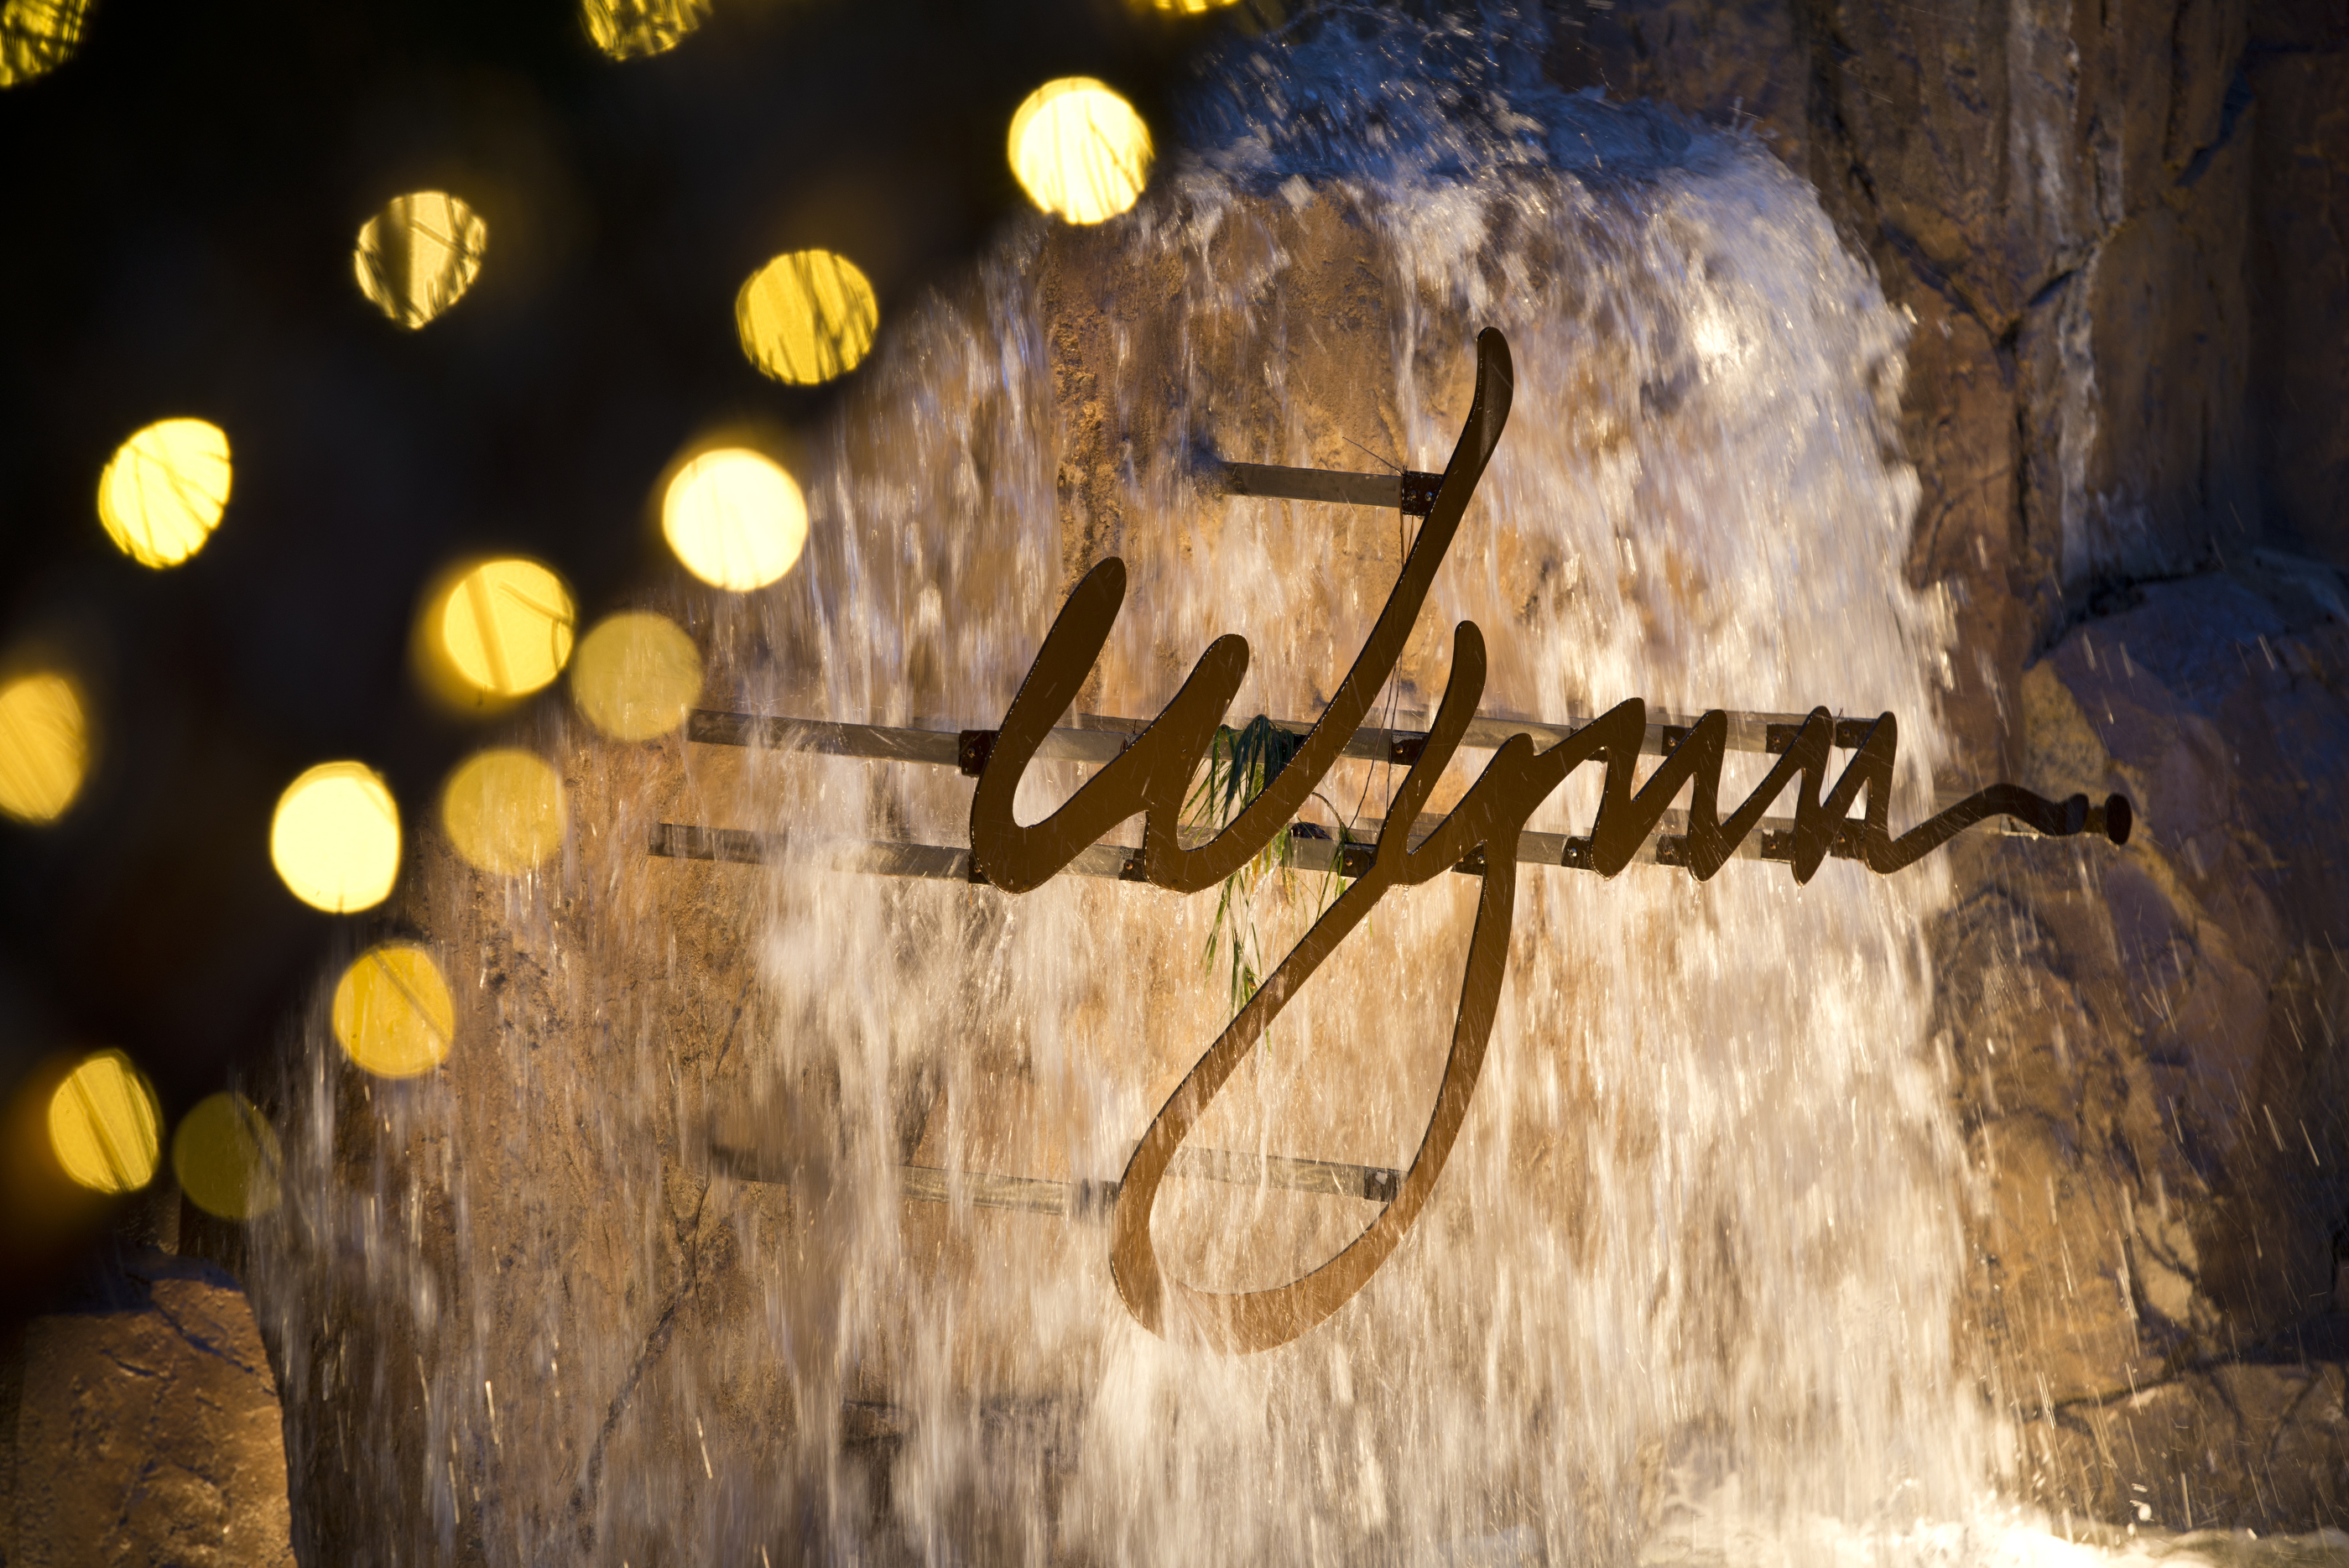 A fountain a the Wynn Resorts with the company name on the front